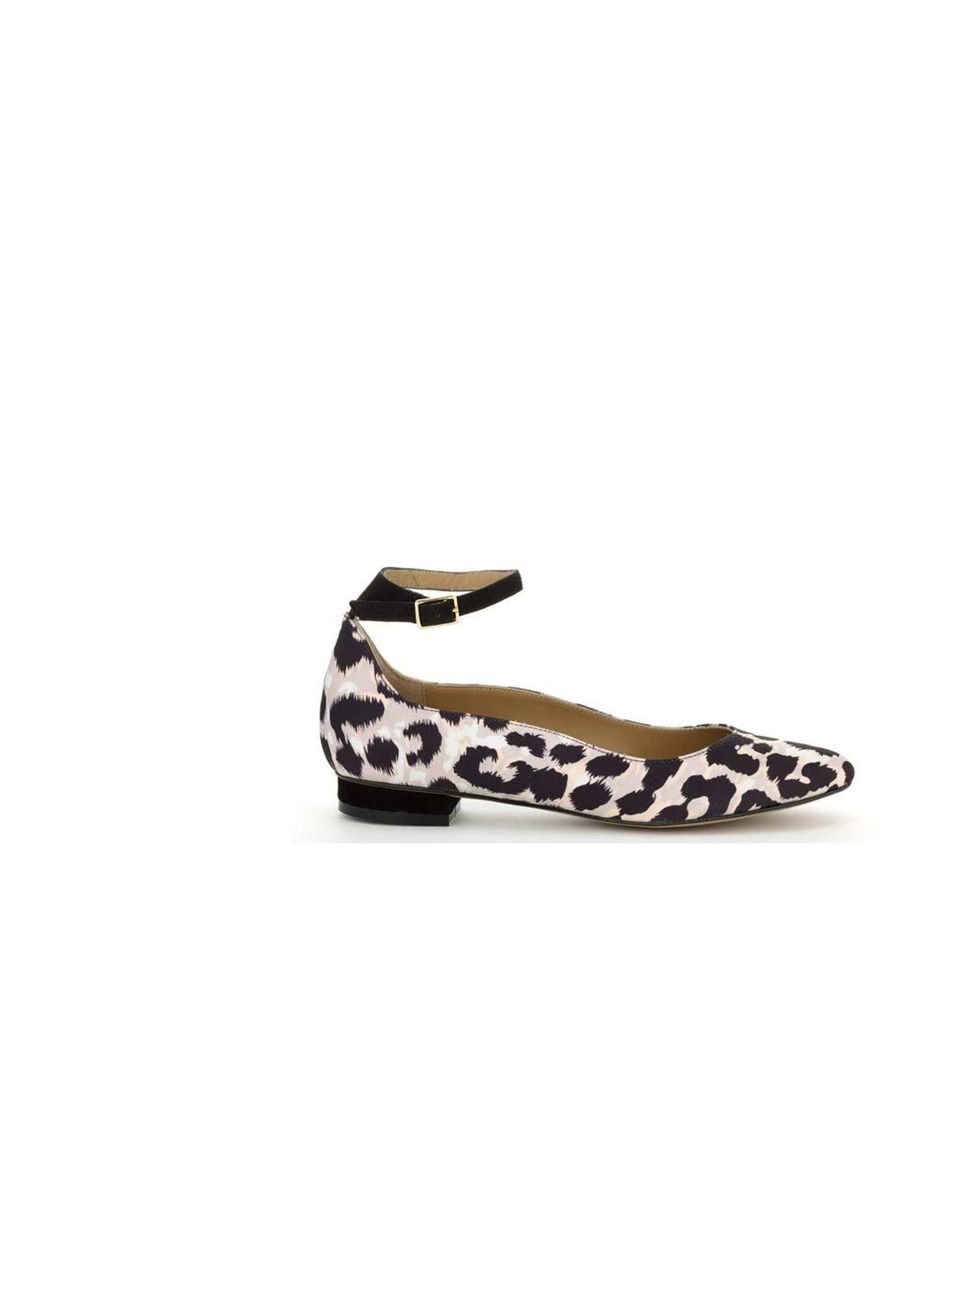 <p>These brighten up any office outfit, and will still work for the weekend!</p><p>- Gillian Brett, Editor in Chief's PA/Editorial Assistant</p><p><a href="http://www.whistles.co.uk/fcp/categorylist/dept/shoes?resetFilters=true">Whistles</a> shoes, £110</